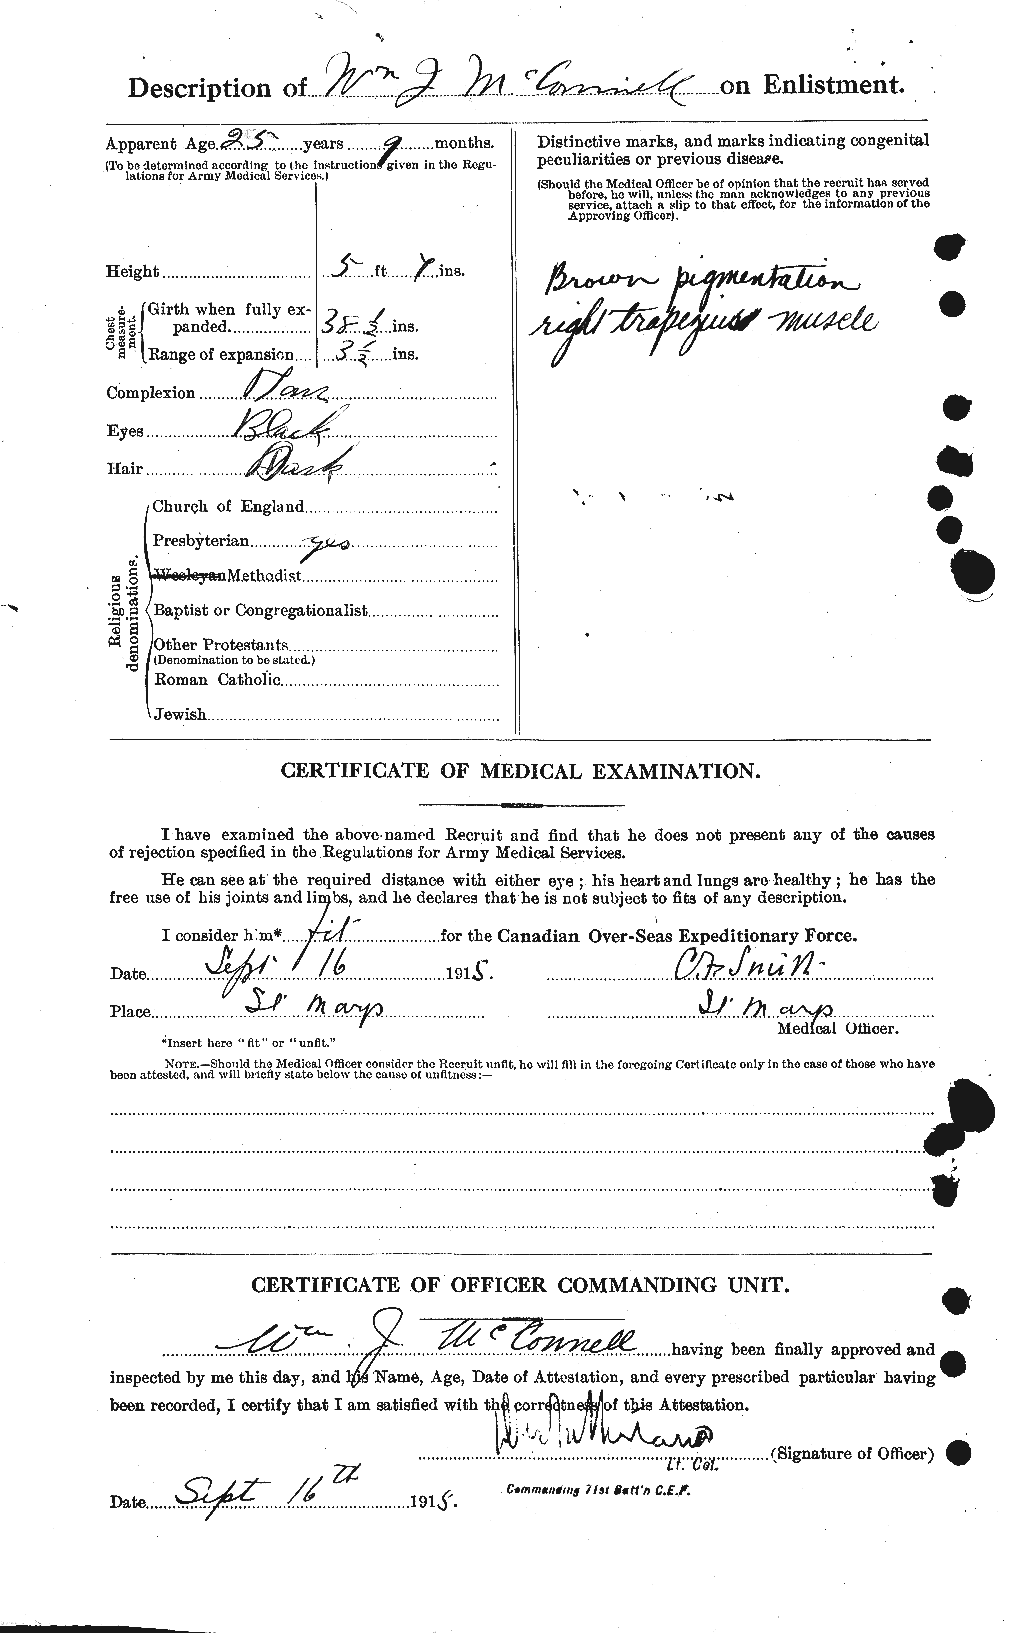 Personnel Records of the First World War - CEF 134228b